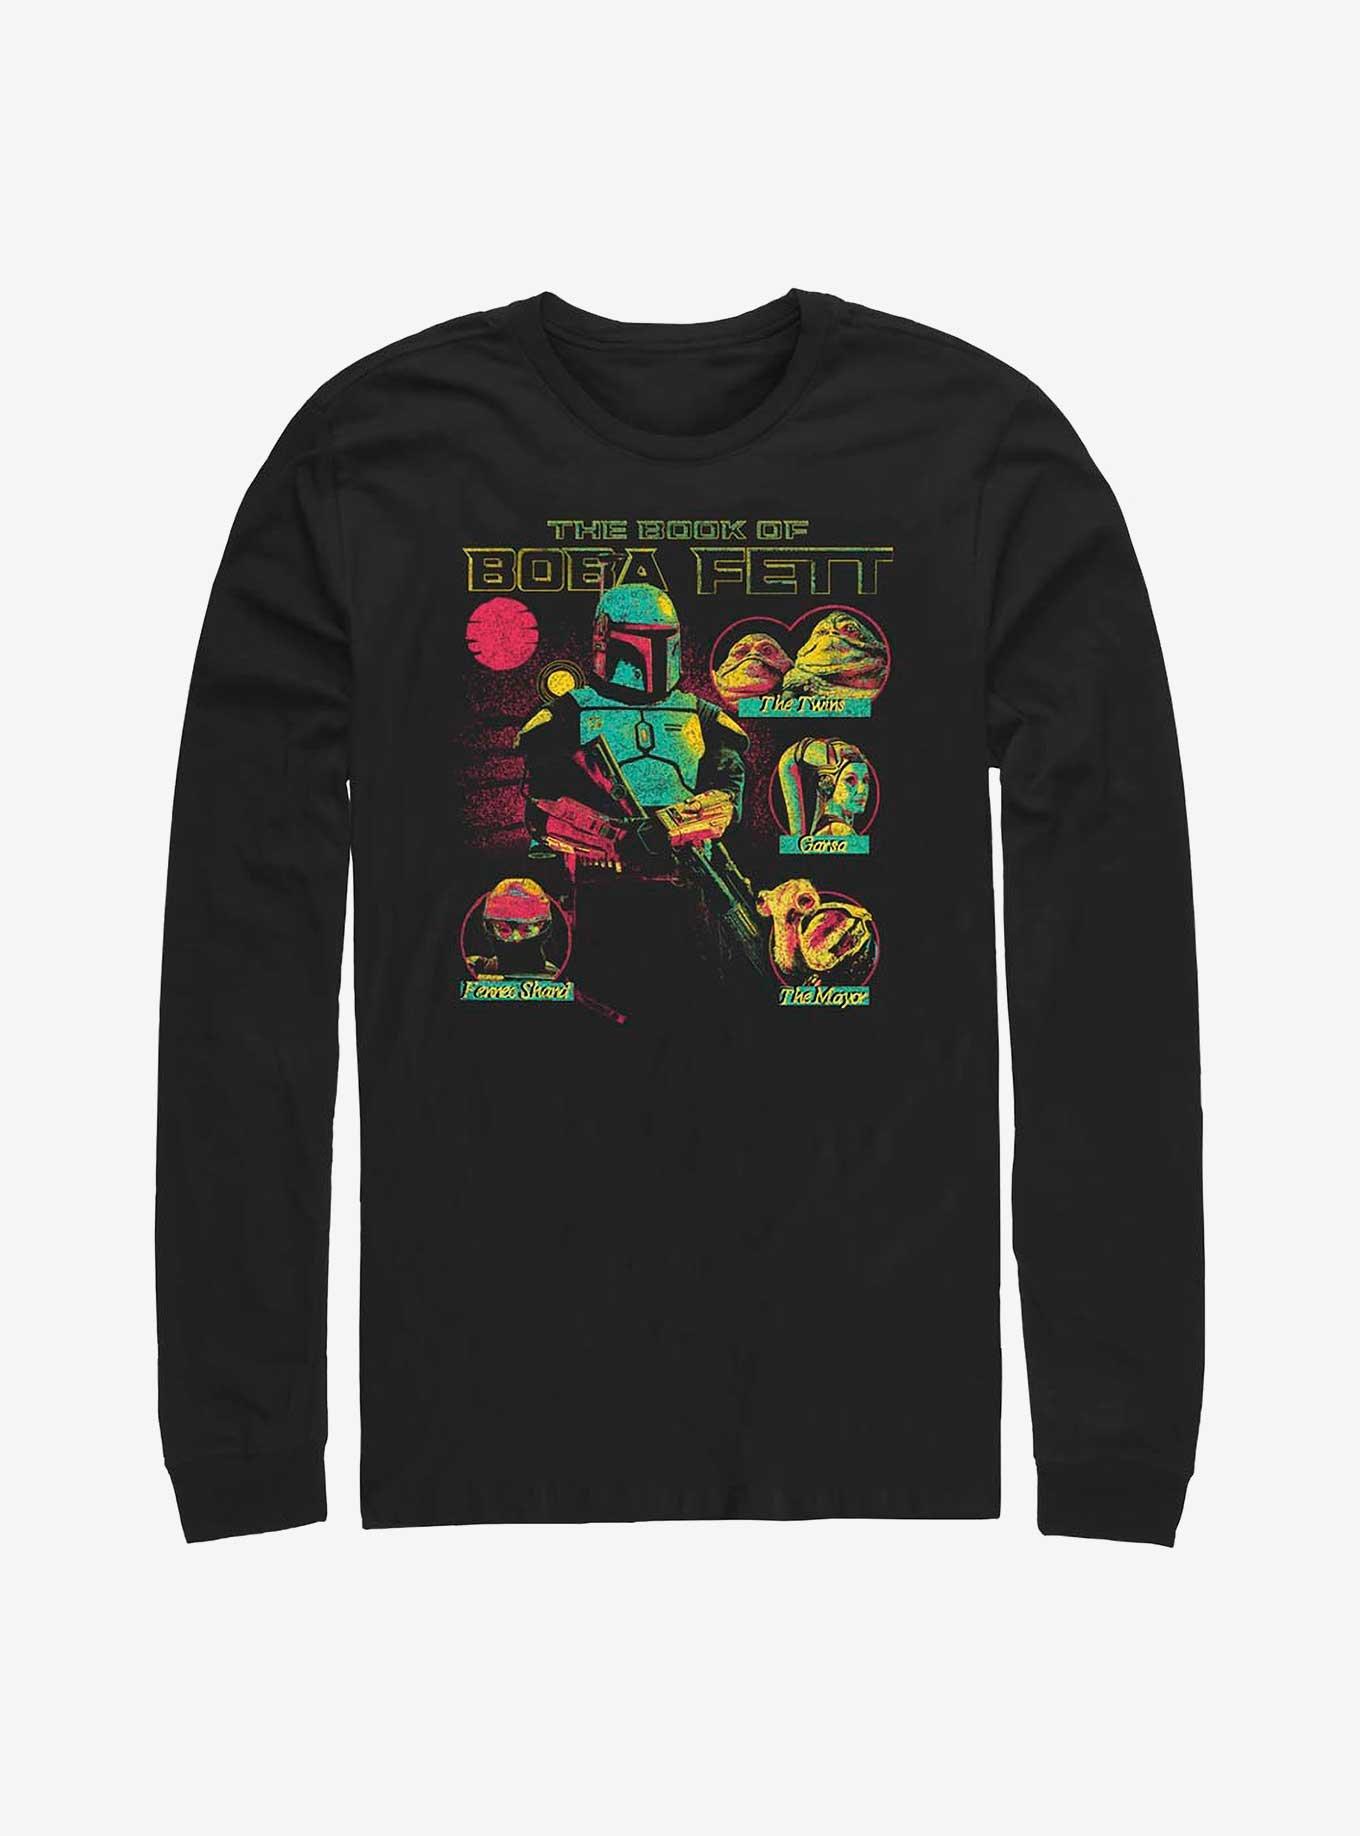 Star Wars The Book Of Boba Fett Takeover Long-Sleeve T-Shirt